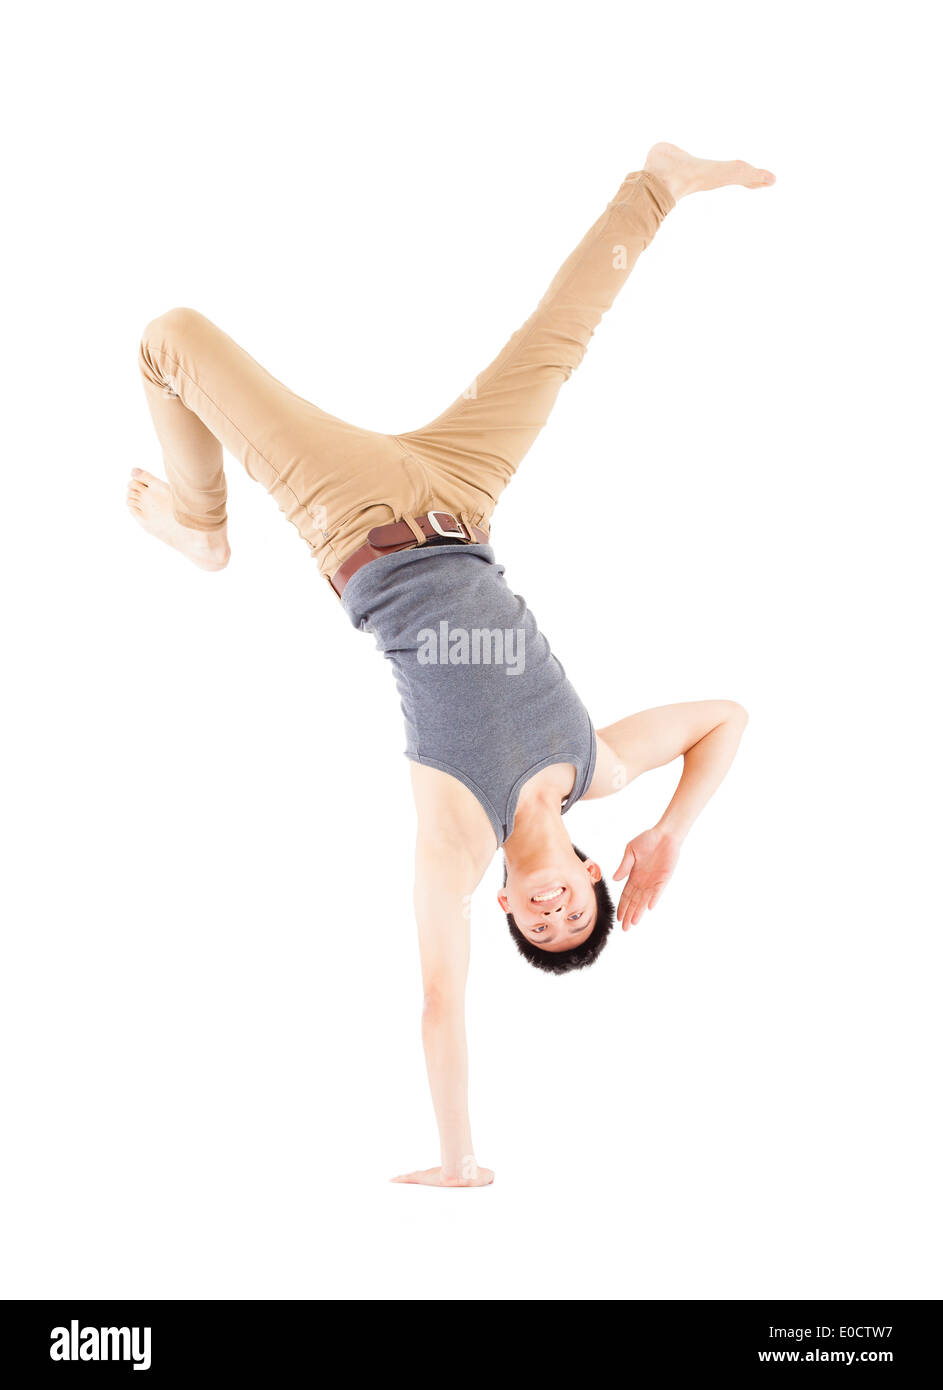 Young man dancing a breakdance and handstand pose Stock Photo